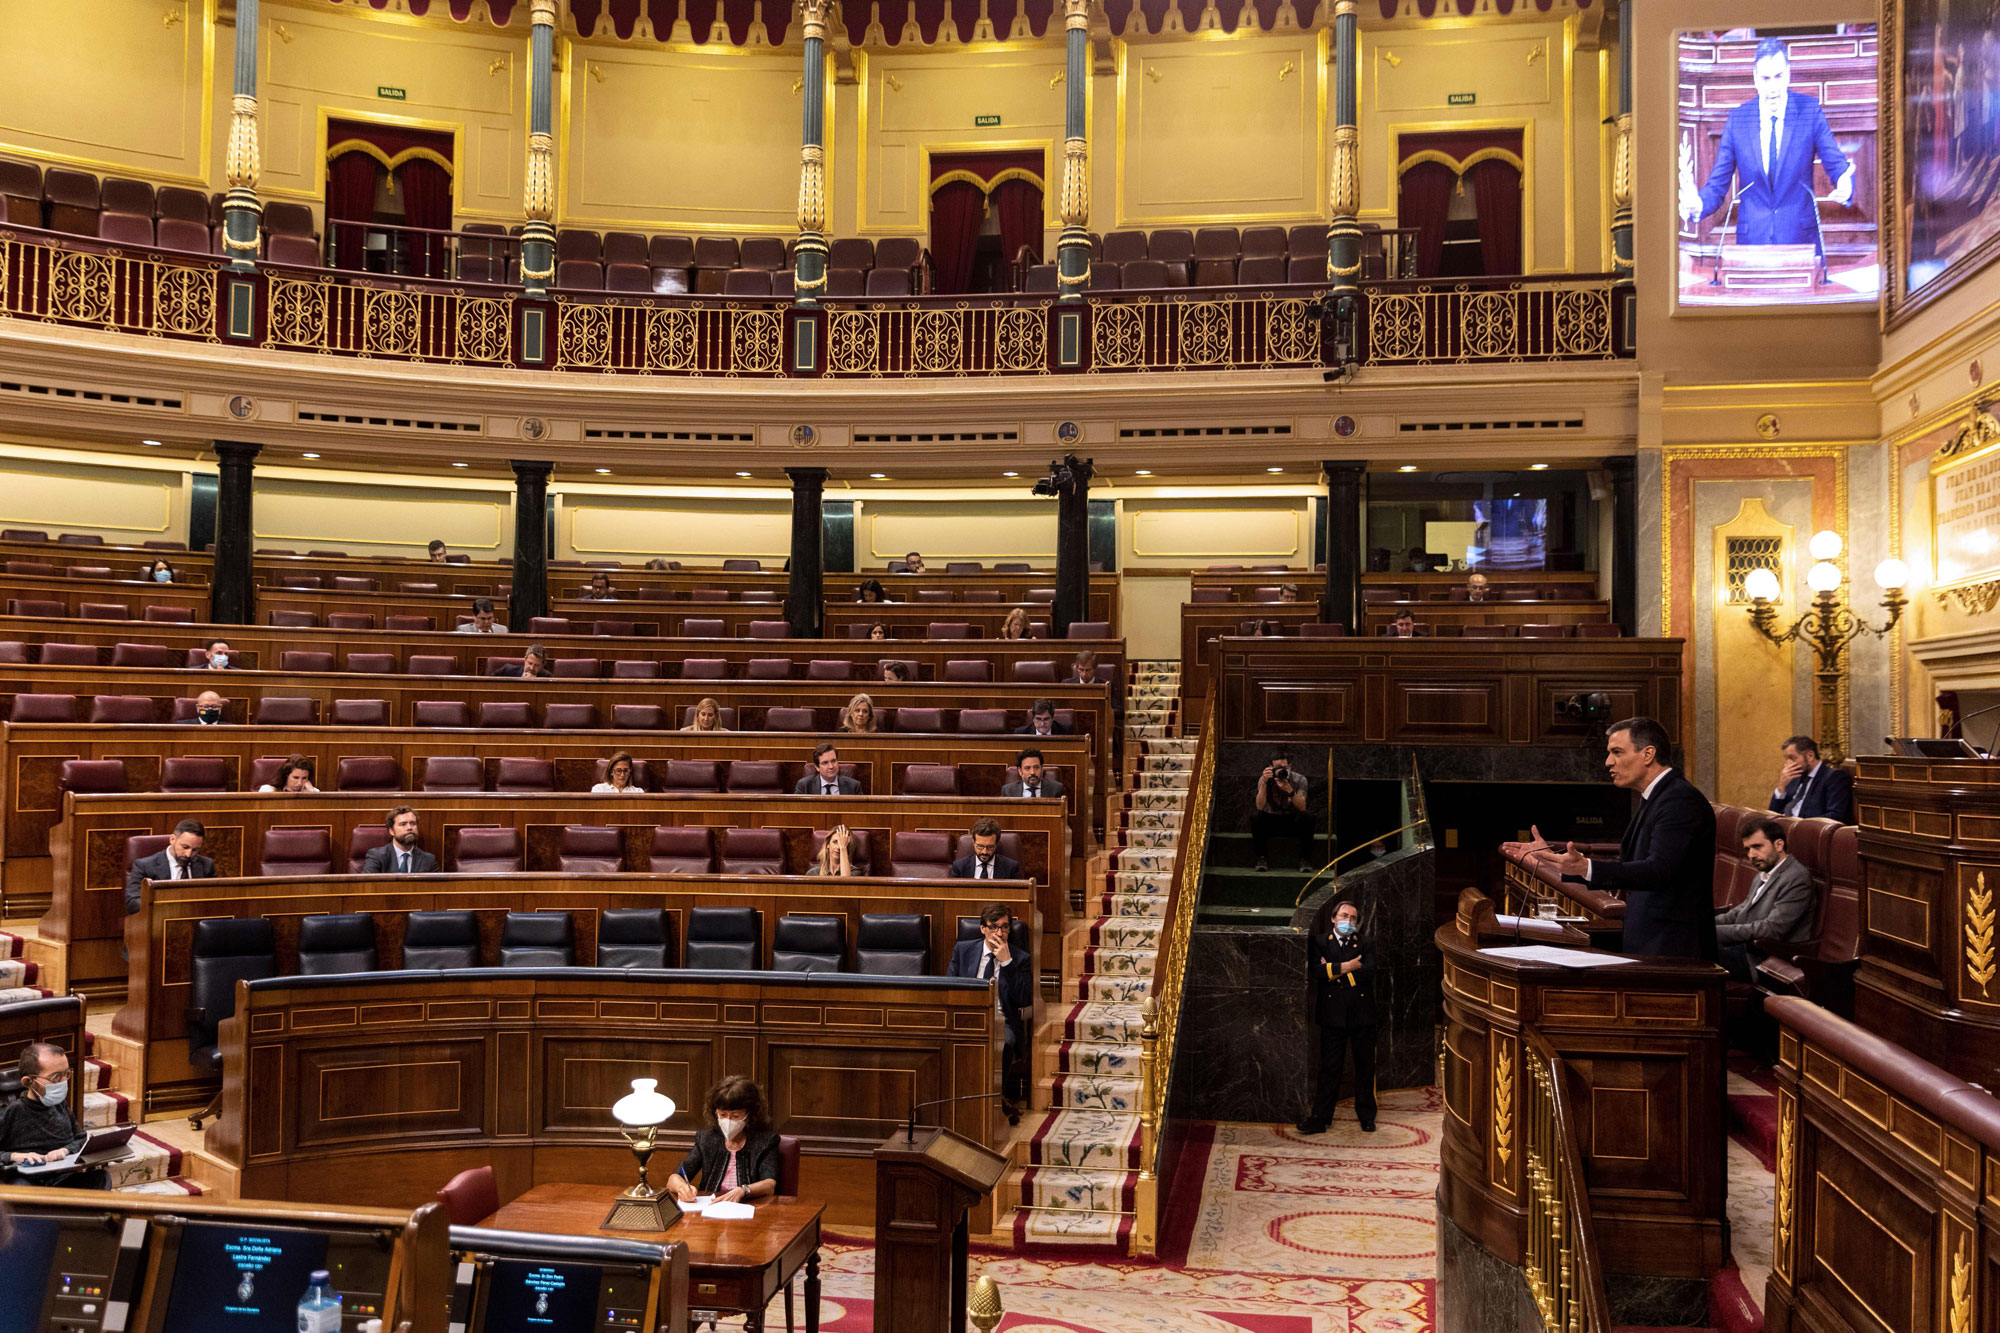 Spain's Prime Minister Pedro Sanchez addresses a plenary session at the parliament to debate on an extension of the state of emergency amid the coronavirus outbreak in Madrid on June 3.